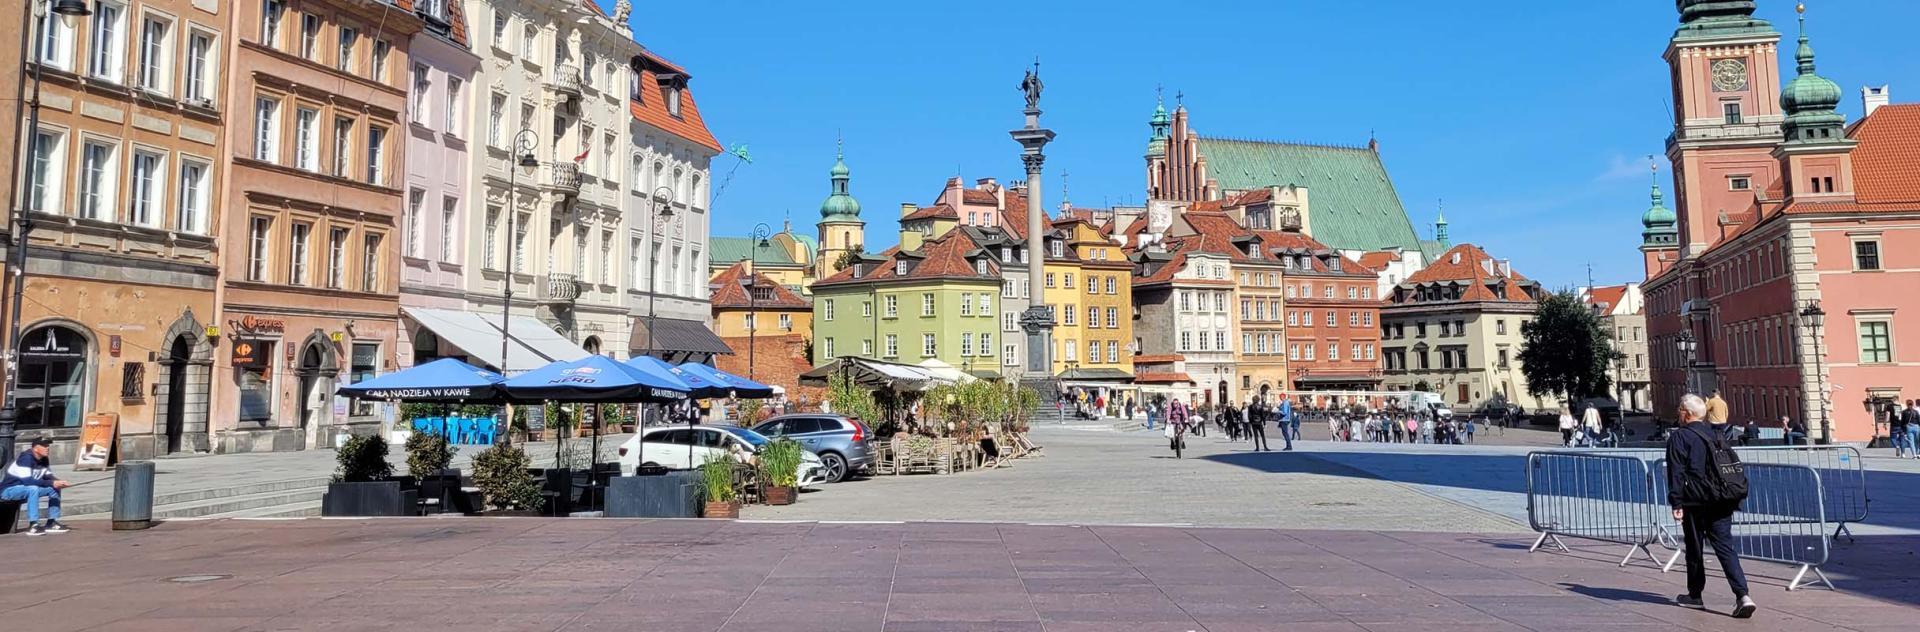 Warsaw what to see in 1 day